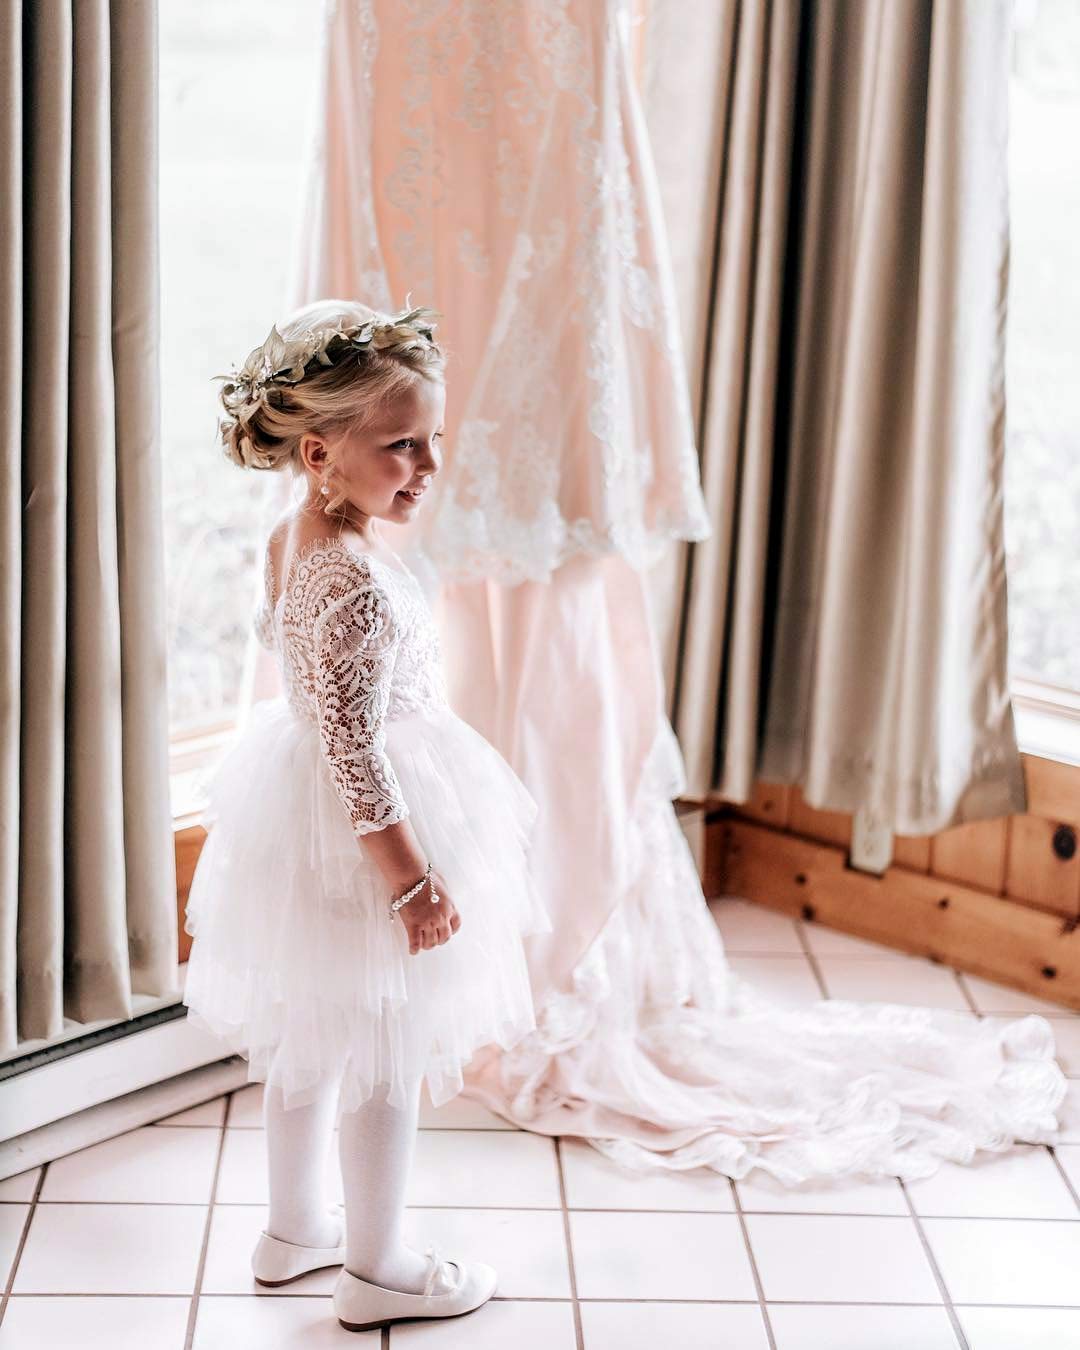 2Bunnies Flower Girl Dress Peony Lace Back A-Line Long Sleeve Tiered Tulle Short (White) - 2BUNNIES